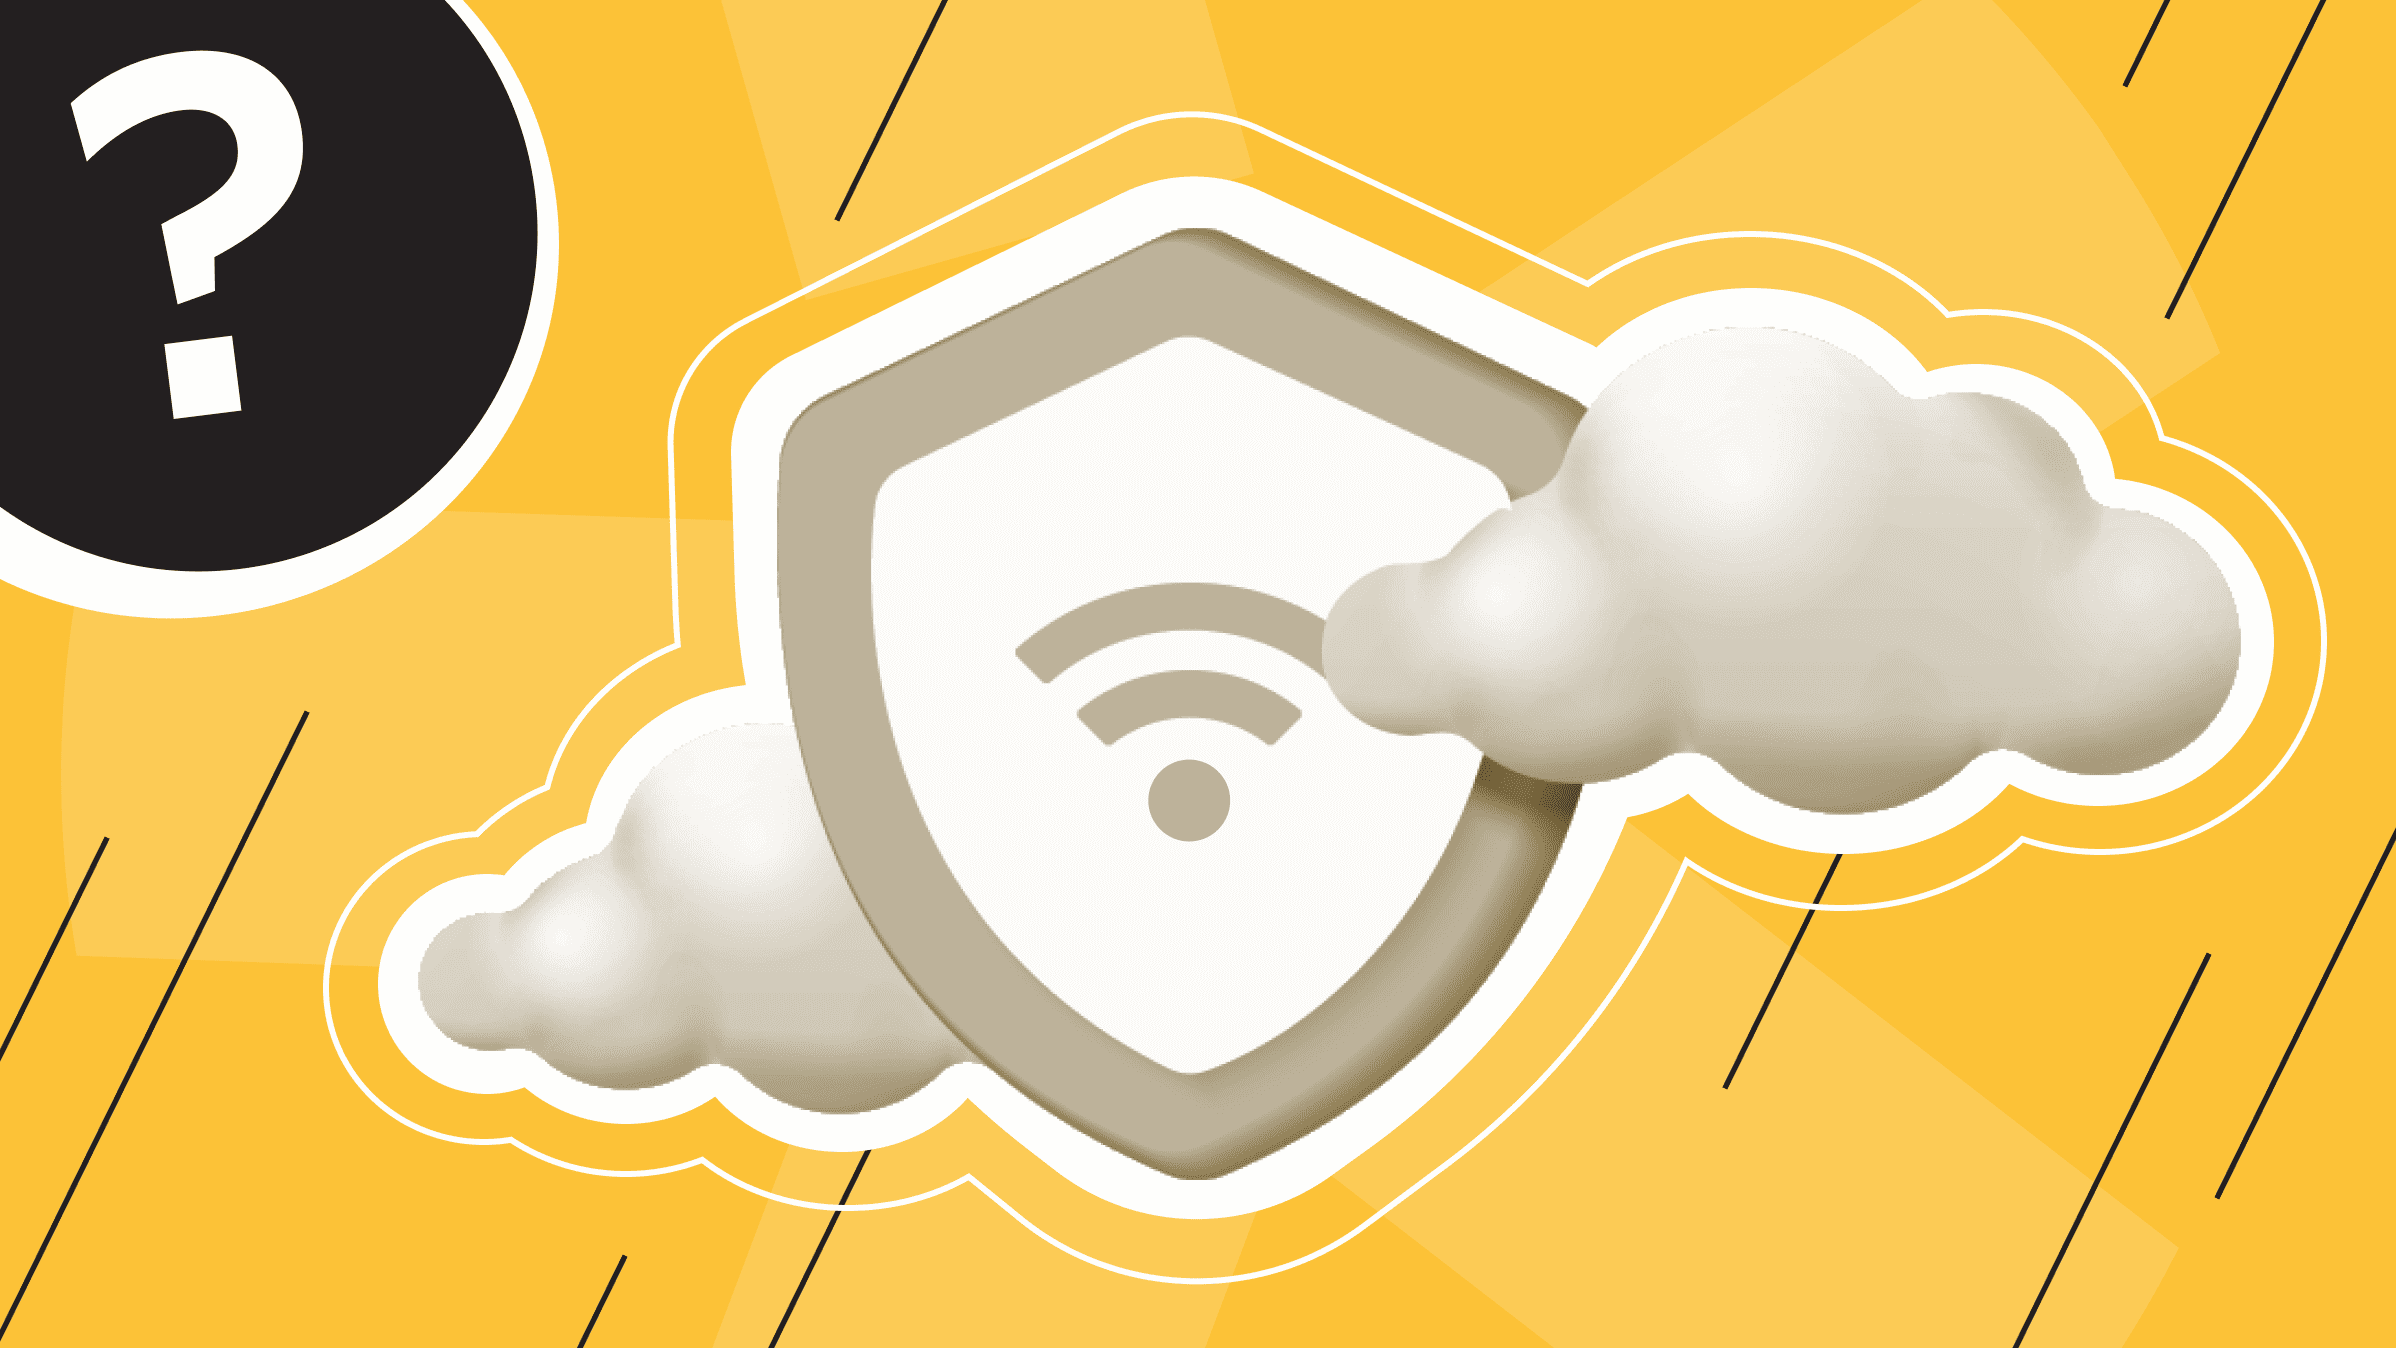 How to Secure Wi-Fi Network: Theory and Tips